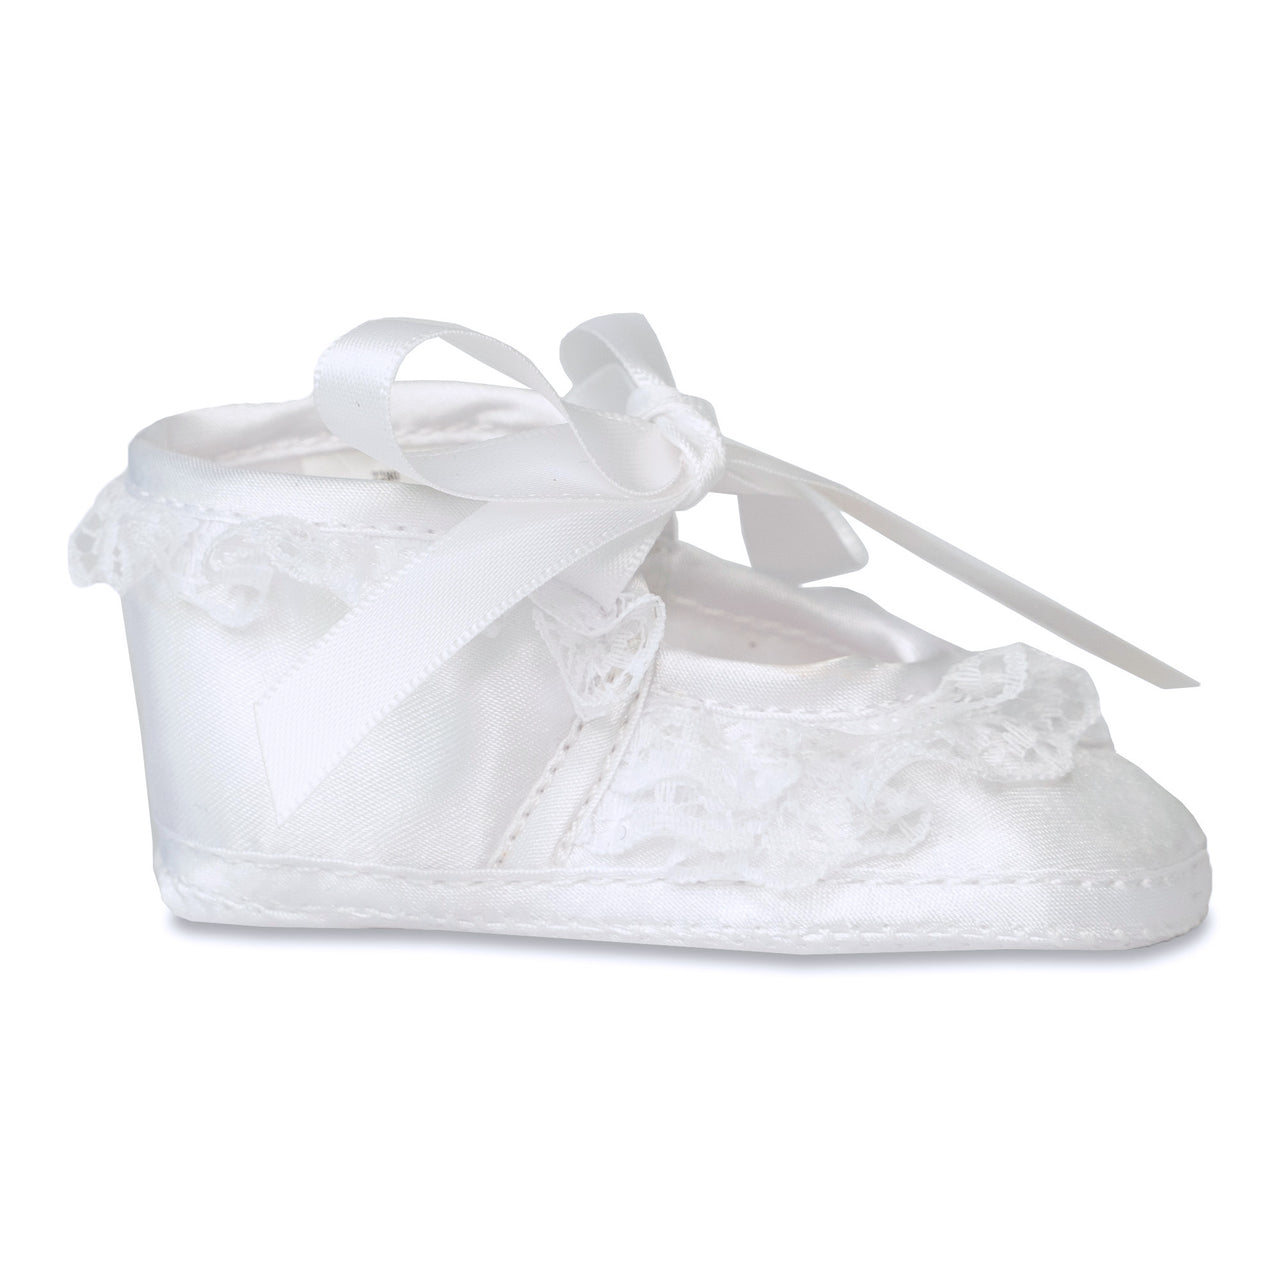 Baby Deer Paislee Infant White Satin Dress Shoes 2280